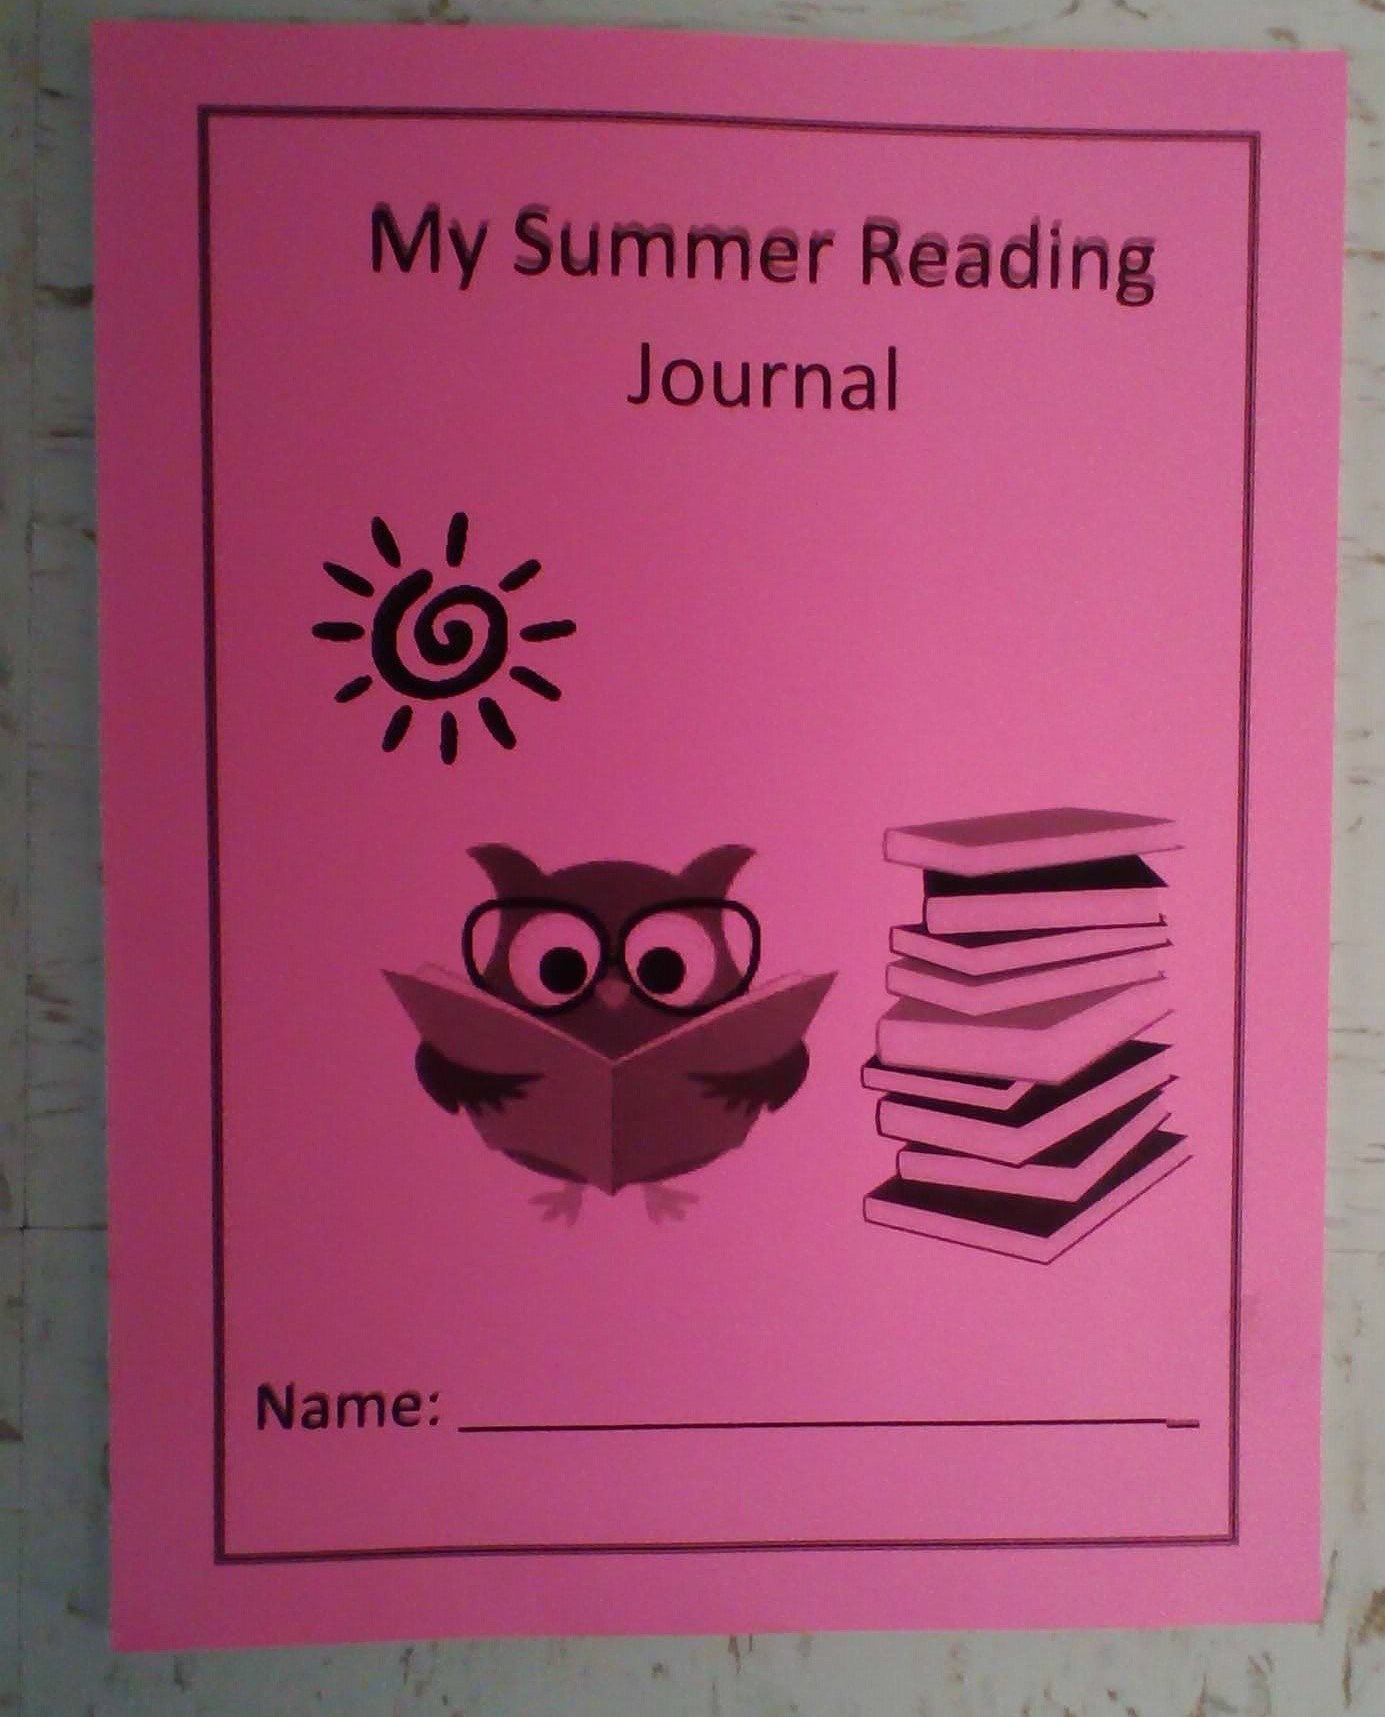 Summer Thrive journal with pink cover